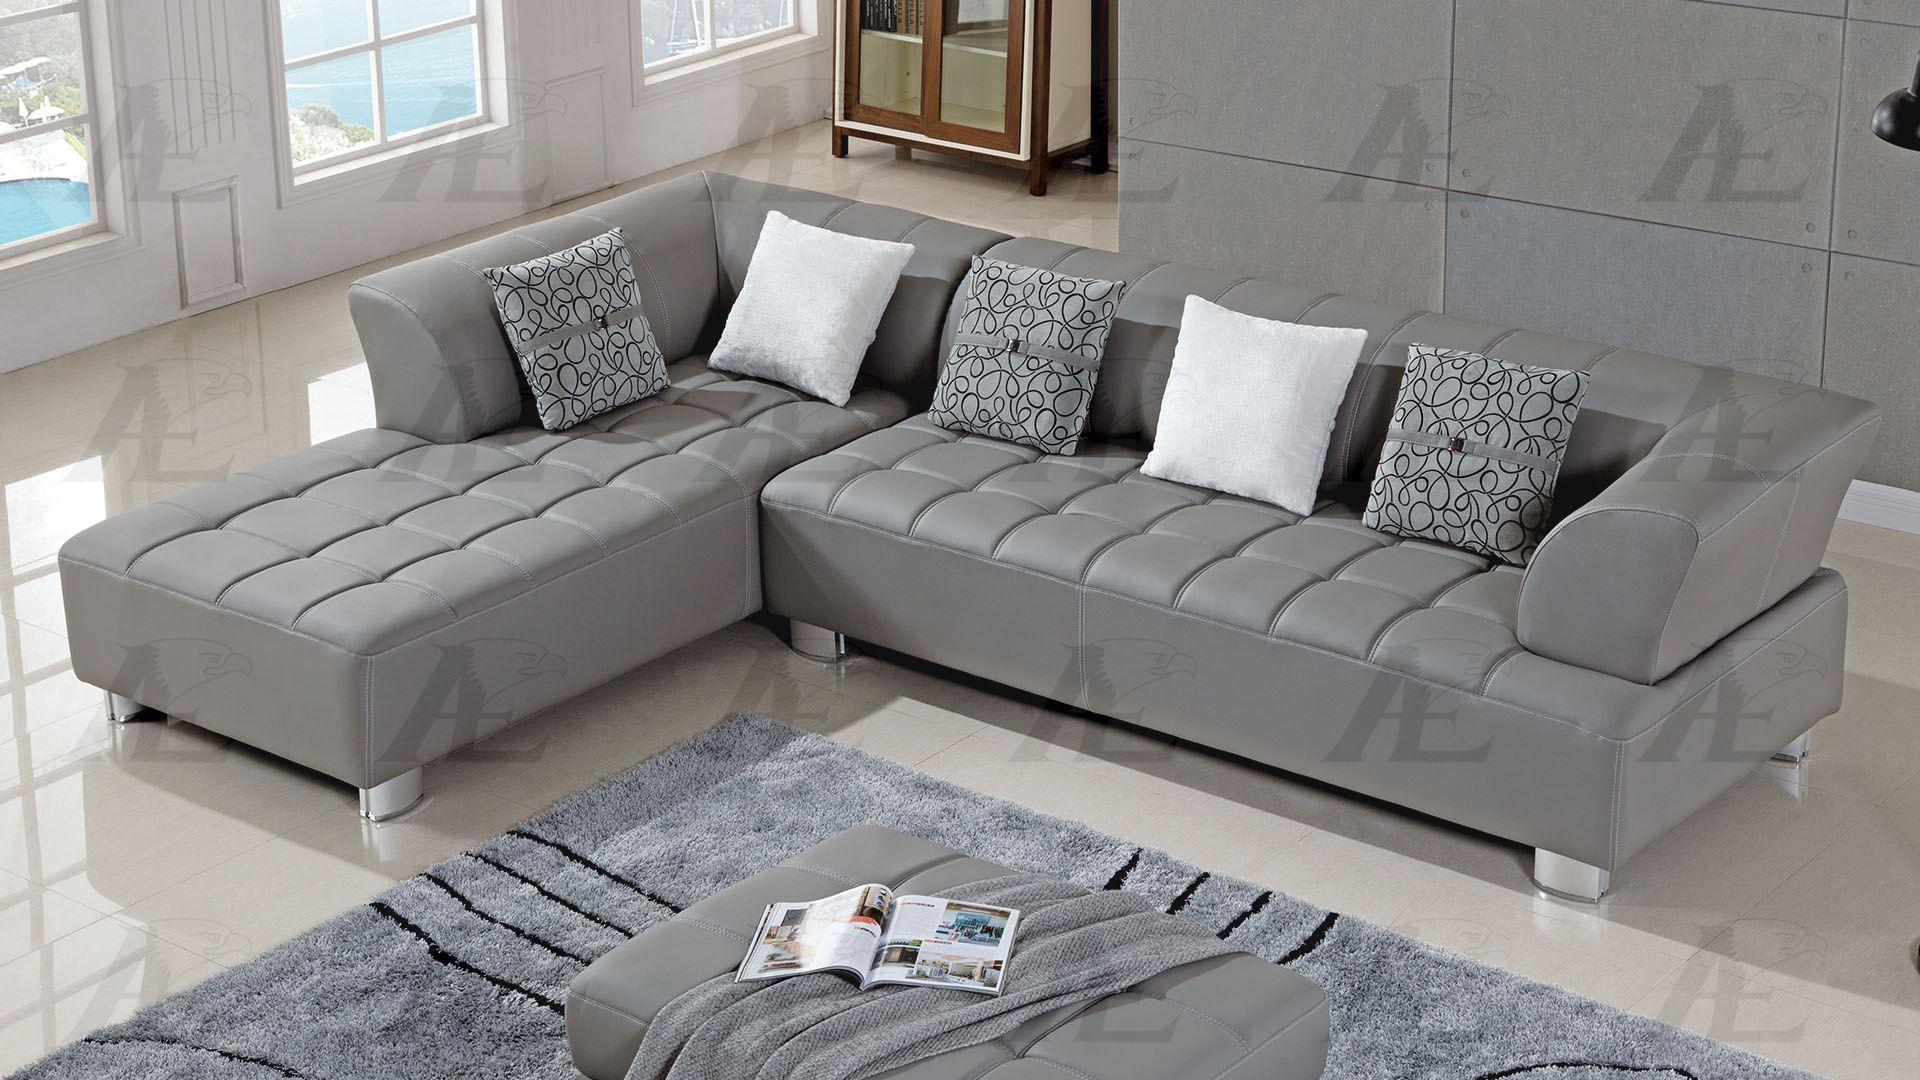 

        
American Eagle Furniture AE-L138-GR Sectional Sofa Set Gray Faux Leather 00842295103963
